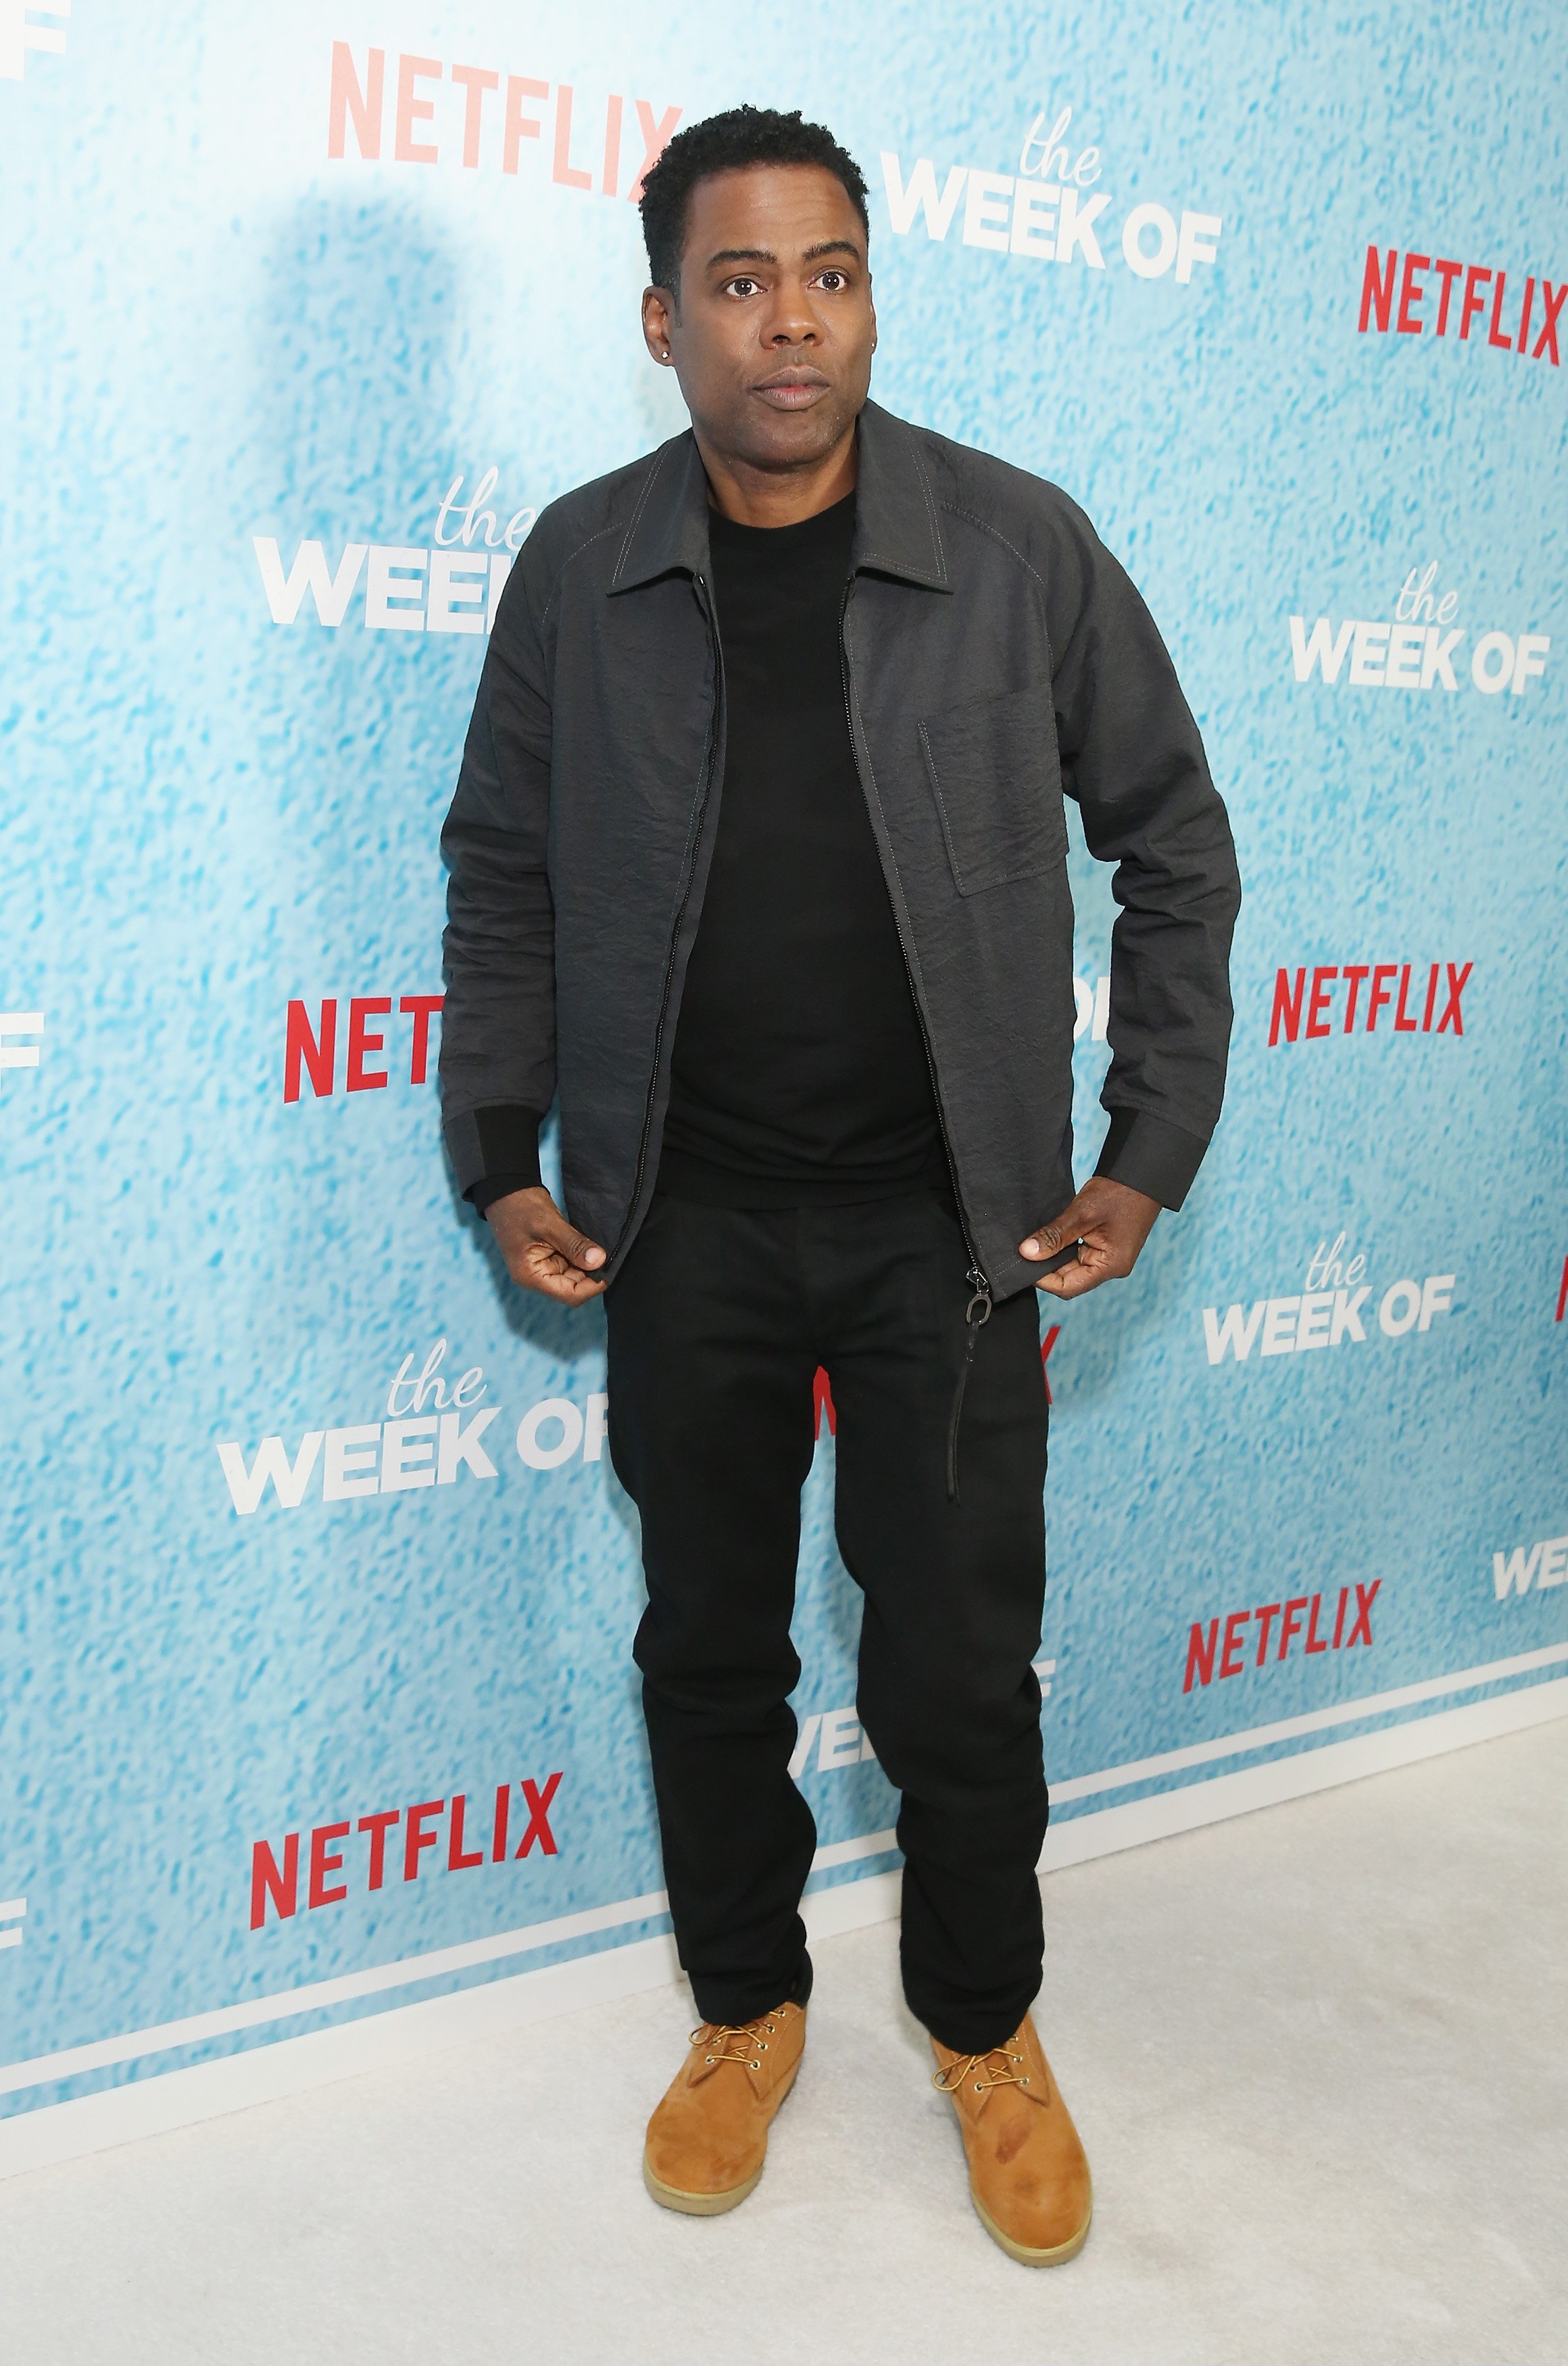 Chris Rock at the premiere of Netflix's "The Week Of" in April 2018. | Photo: Getty Images